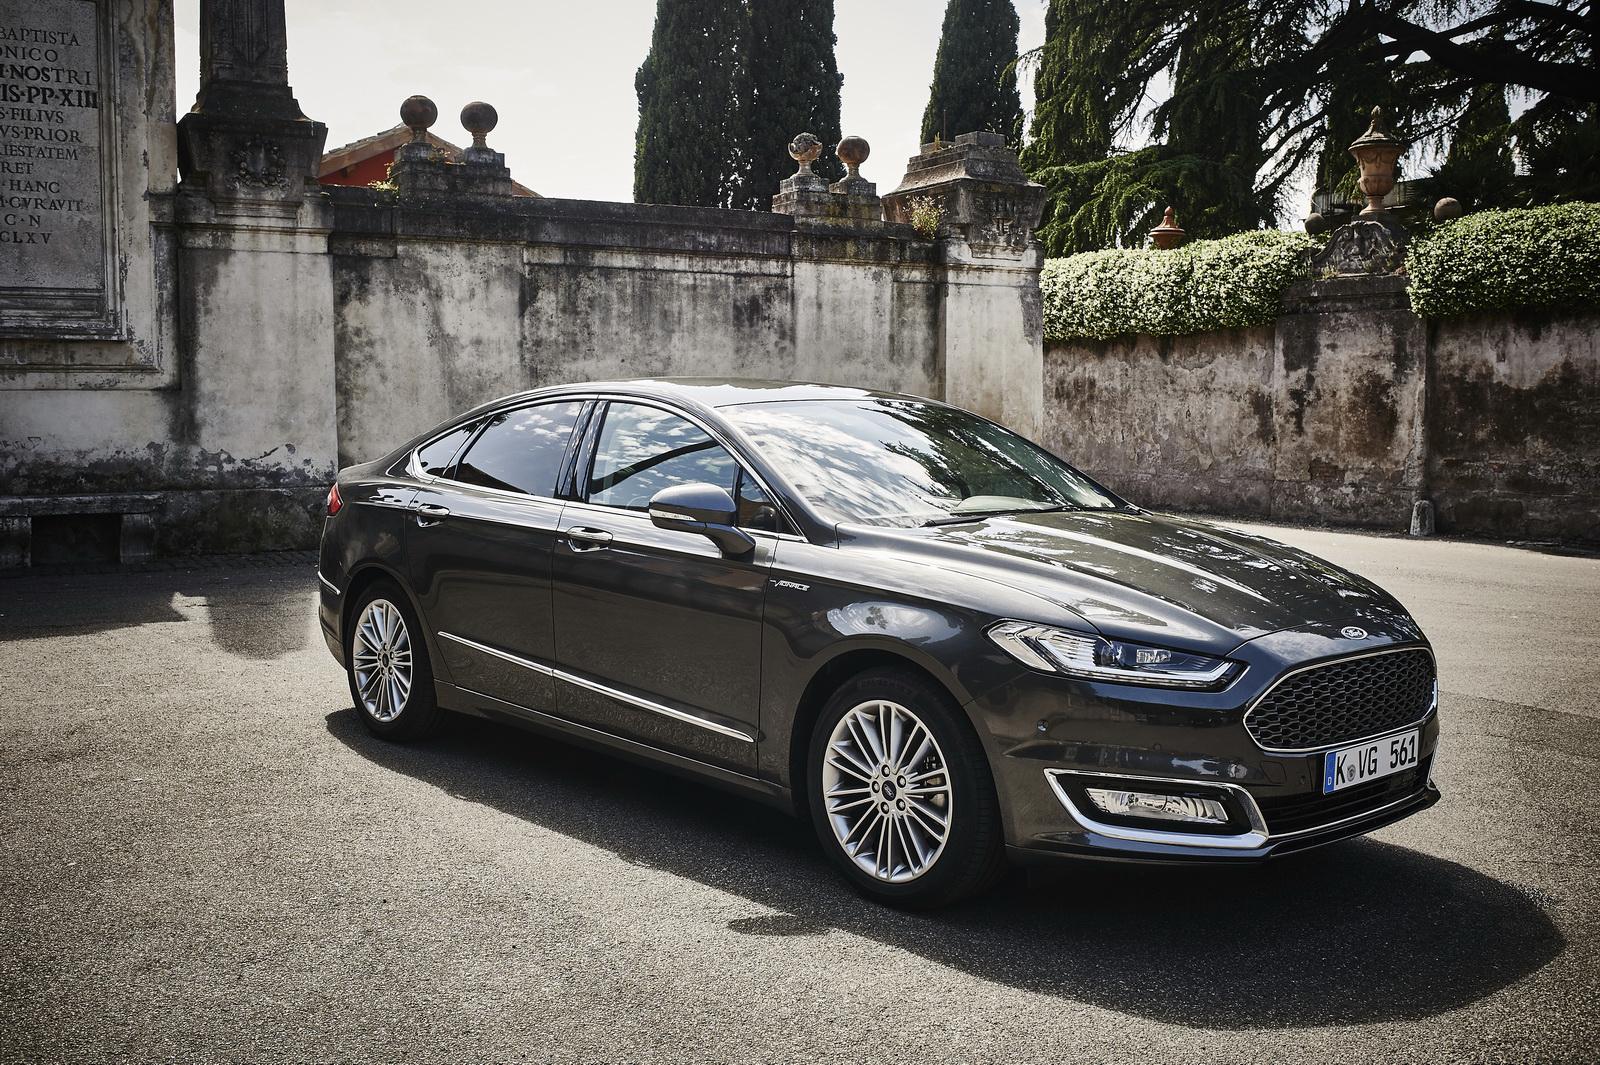 YEN FORD MONDEO VGNALE DETAYLI RESM GALERS